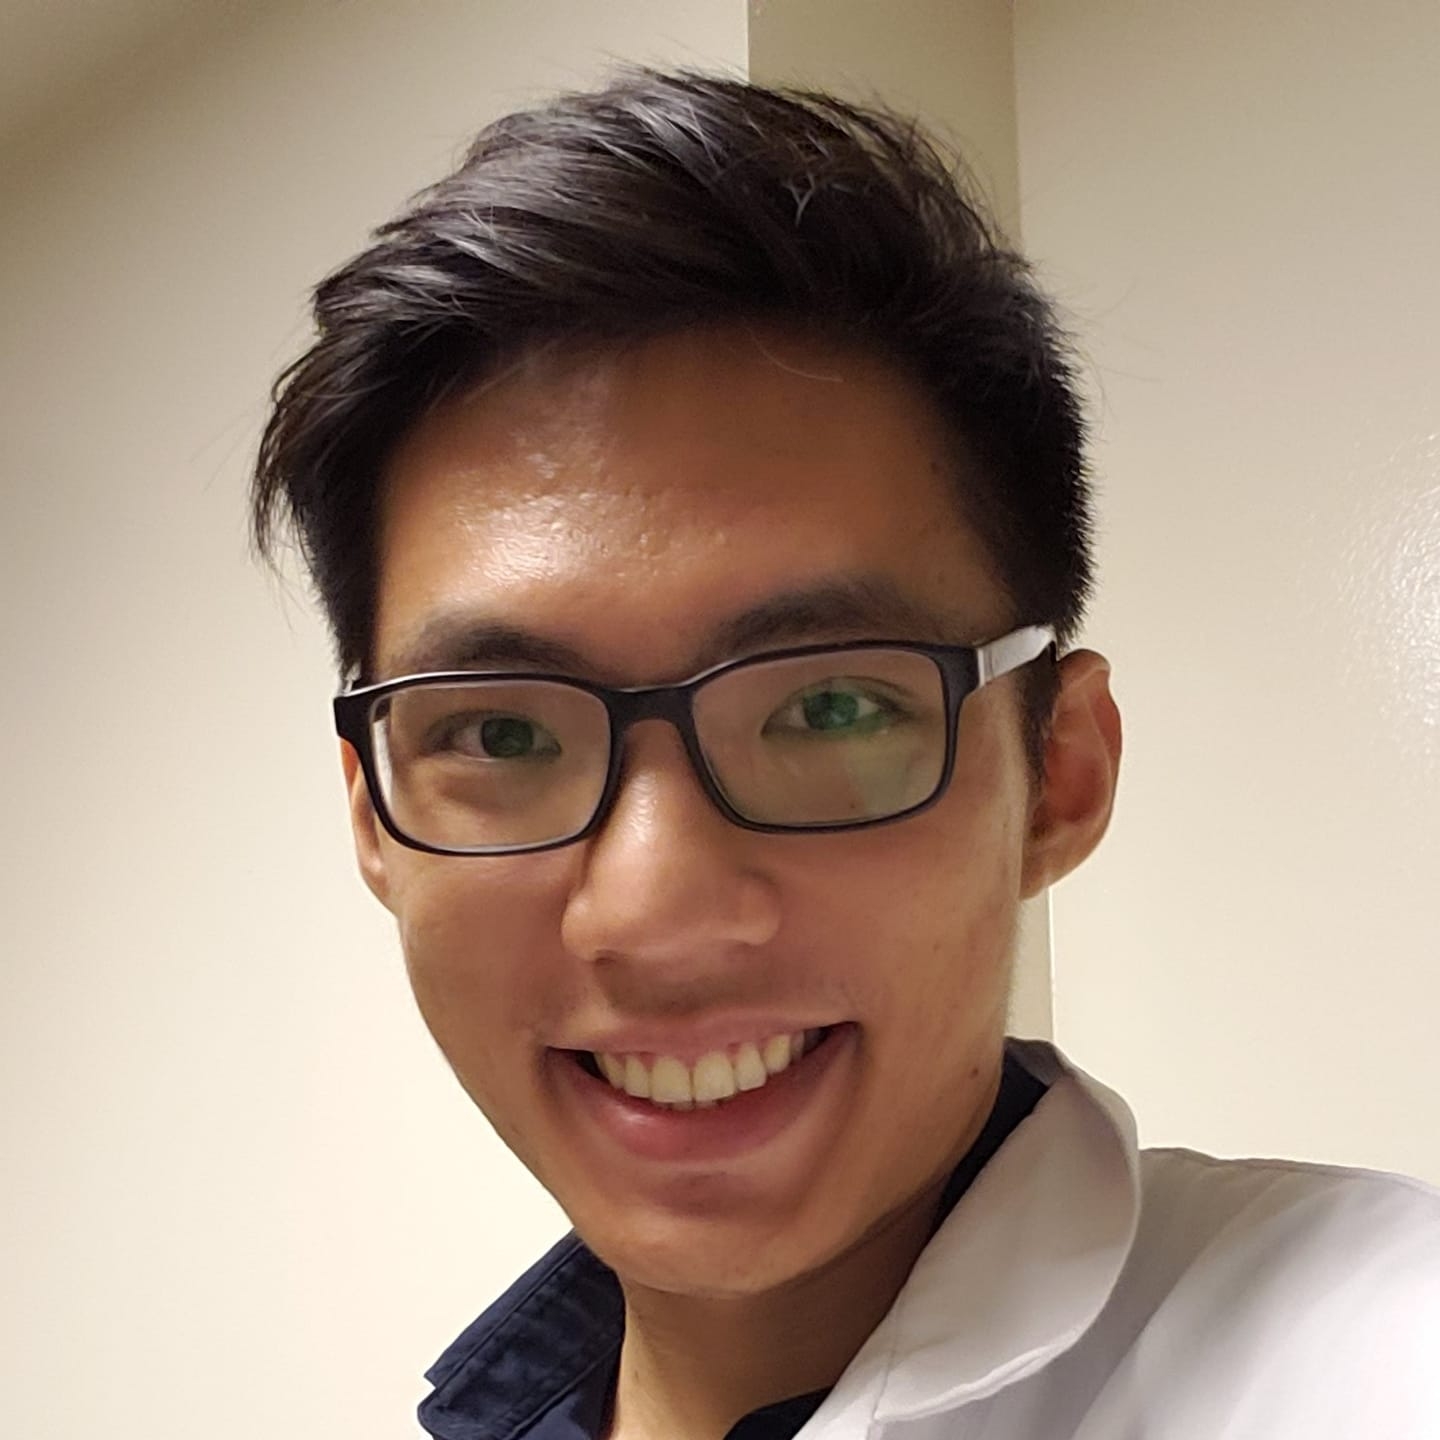 Smiling south east Asian male wearing glasses and a lab coat.